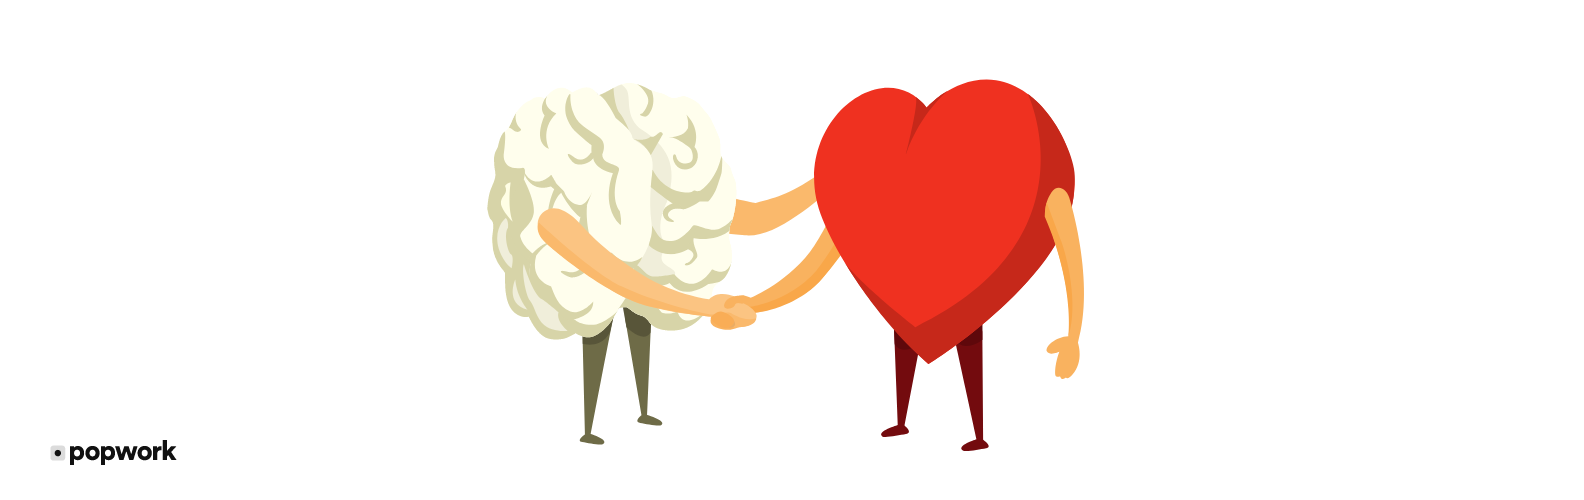 Drawing of A brain shaking a heart's hand - Popwork